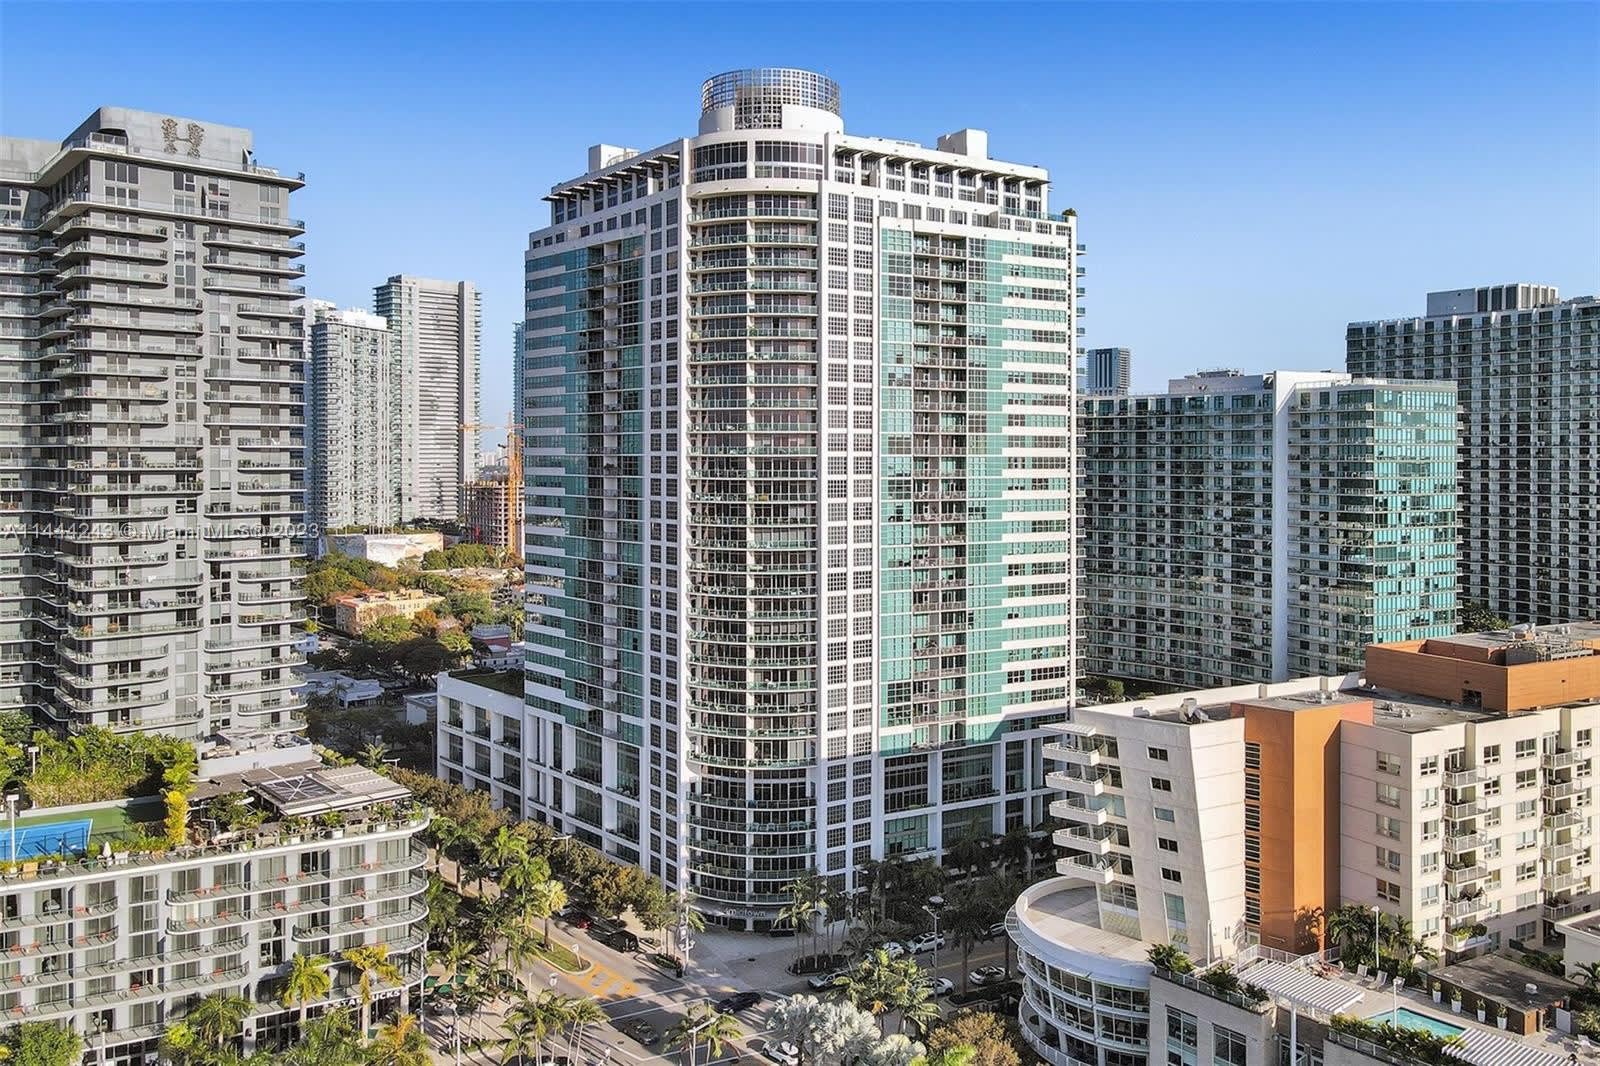 Live in Midtown Miami near Shops, Restaurants, Brunch and More : Gio Midtown